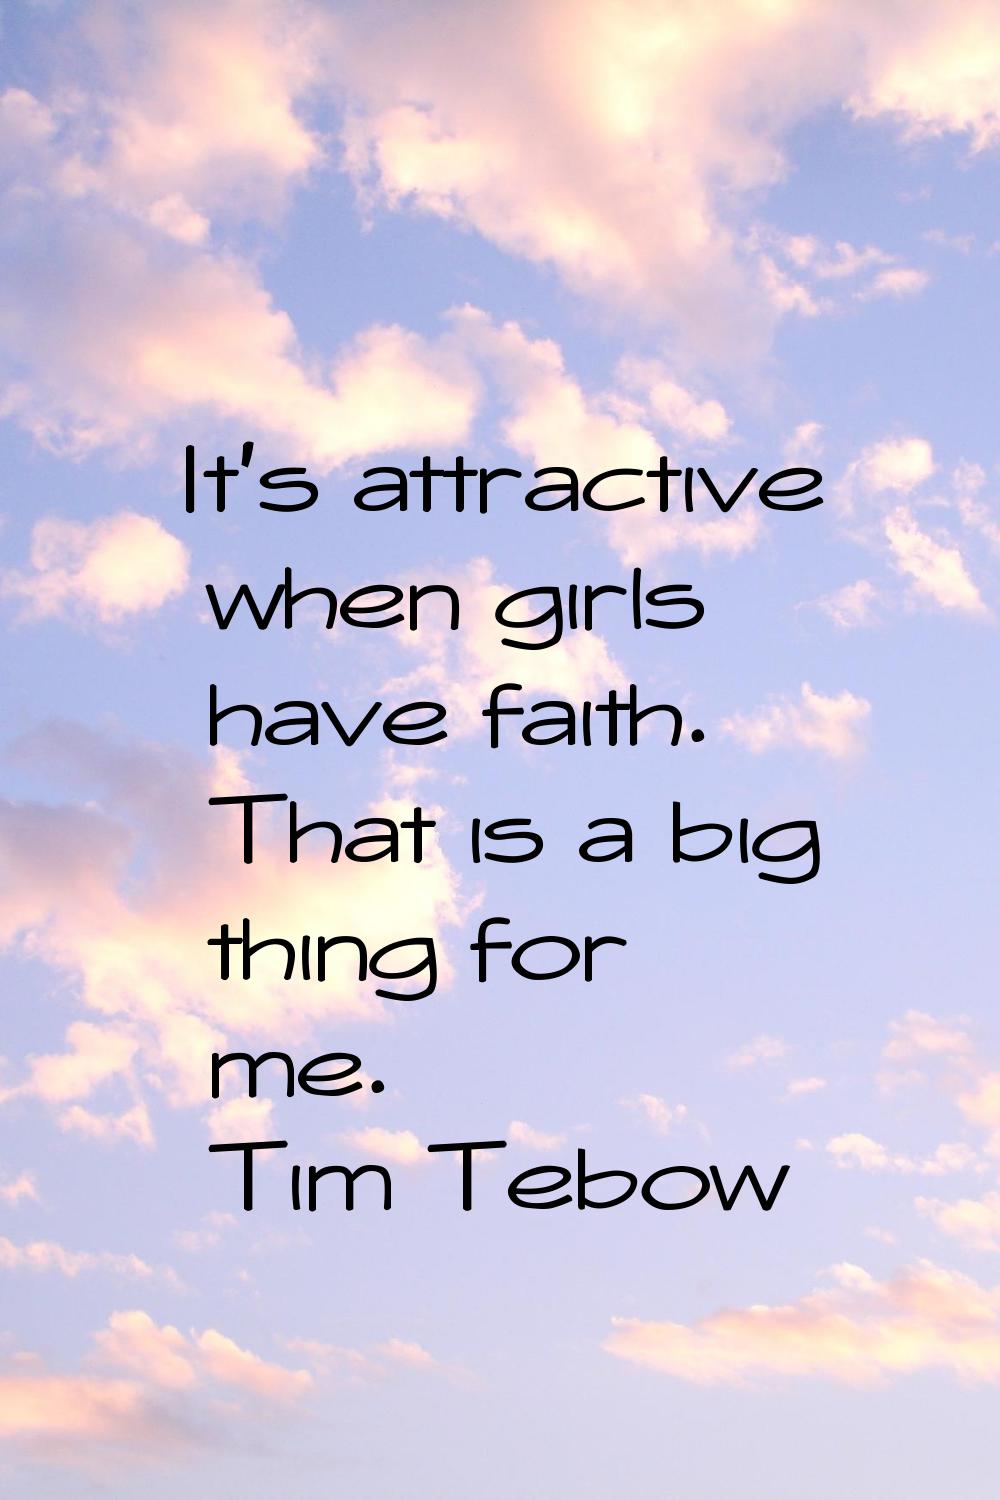 It's attractive when girls have faith. That is a big thing for me.